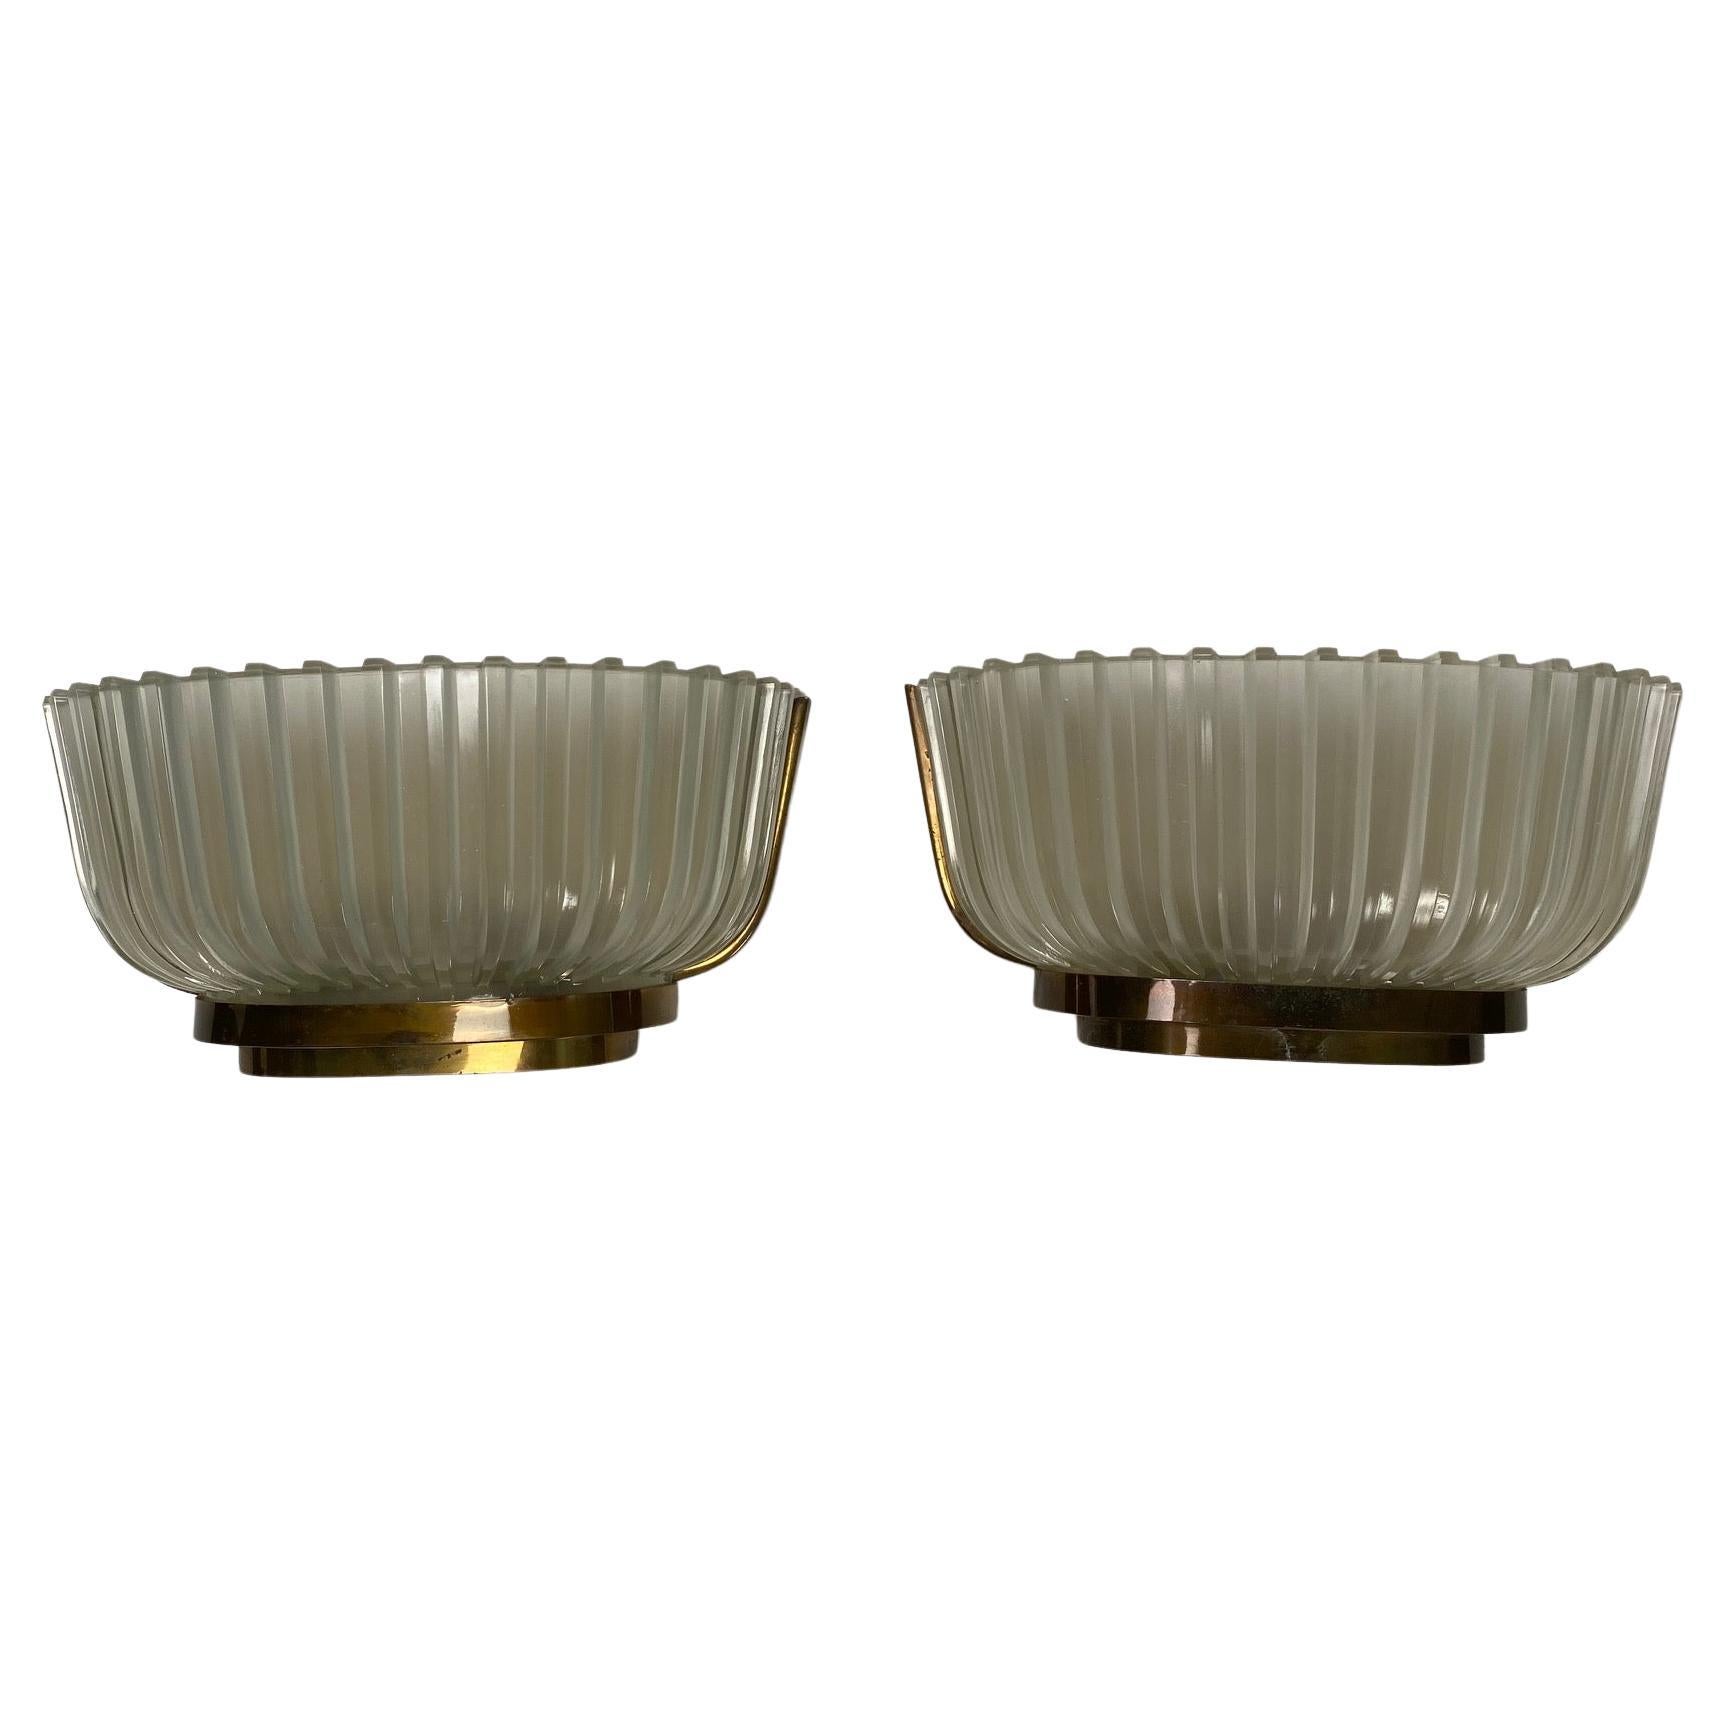 Pair of Seguso Sconces, Brass and glass Mid-Century Wall Lamps, 1940s For Sale